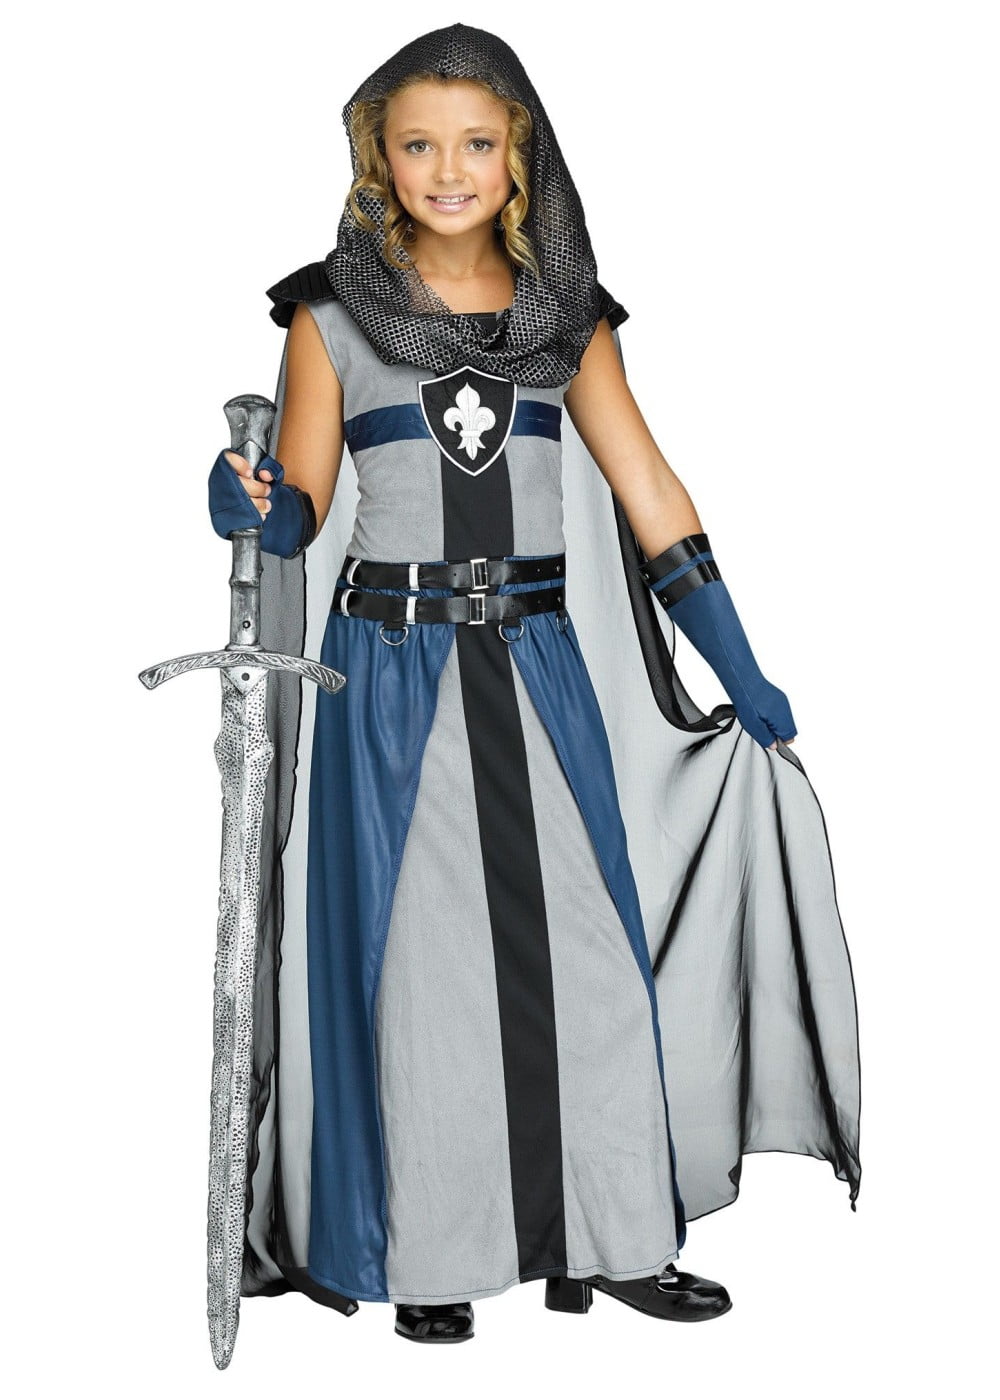 Details about   Disguise Nella The Princess Knight Toddlers Childrens Halloween Costume 14233 